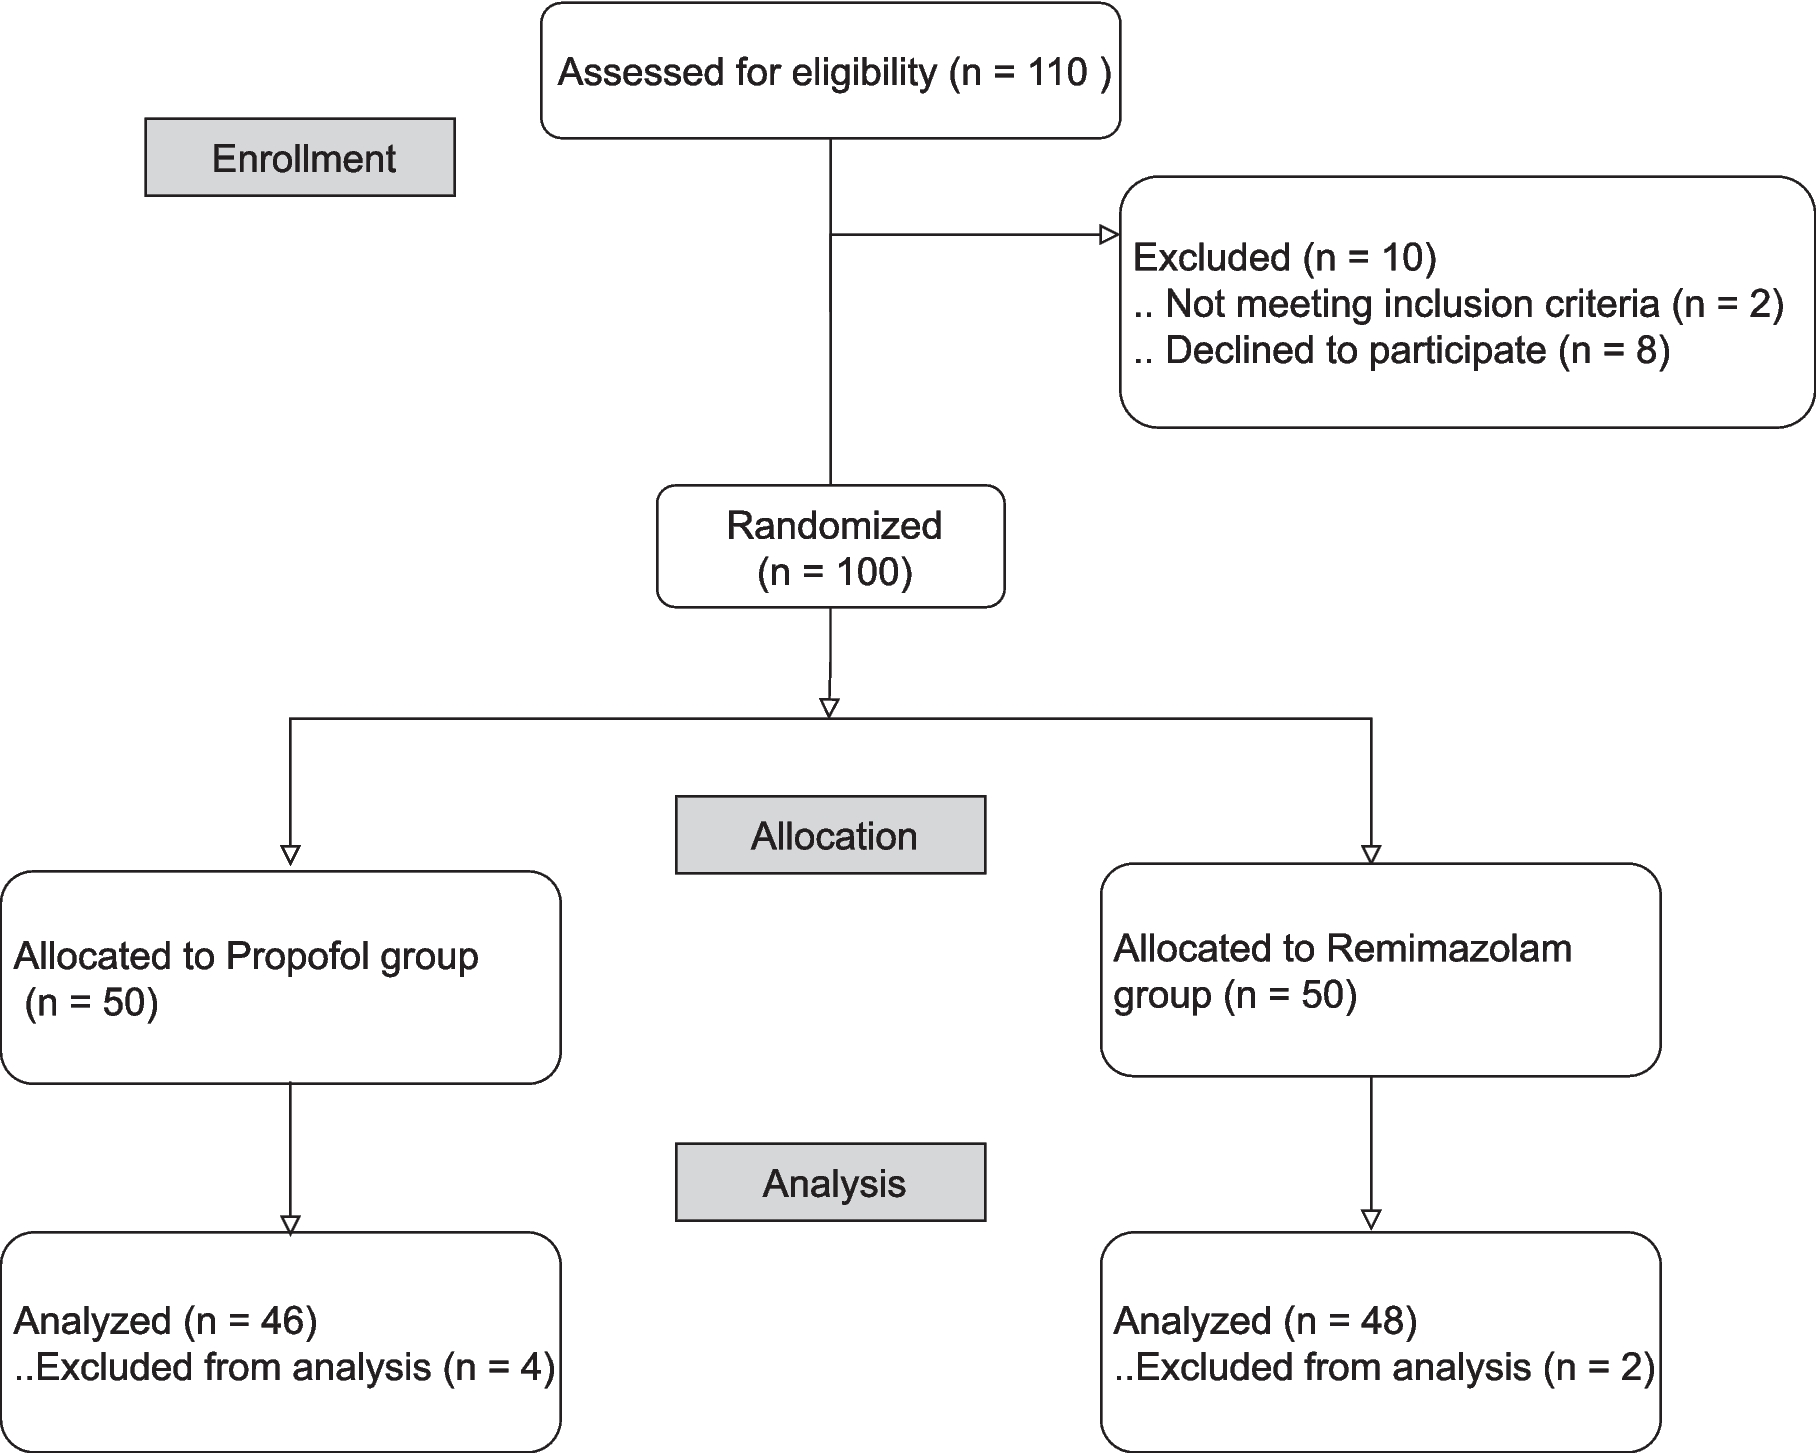 Comparison of hypotension incidence between remimazolam and propofol in patients with hypertension undergoing neurosurgery: prospective, randomized, single-blind trial